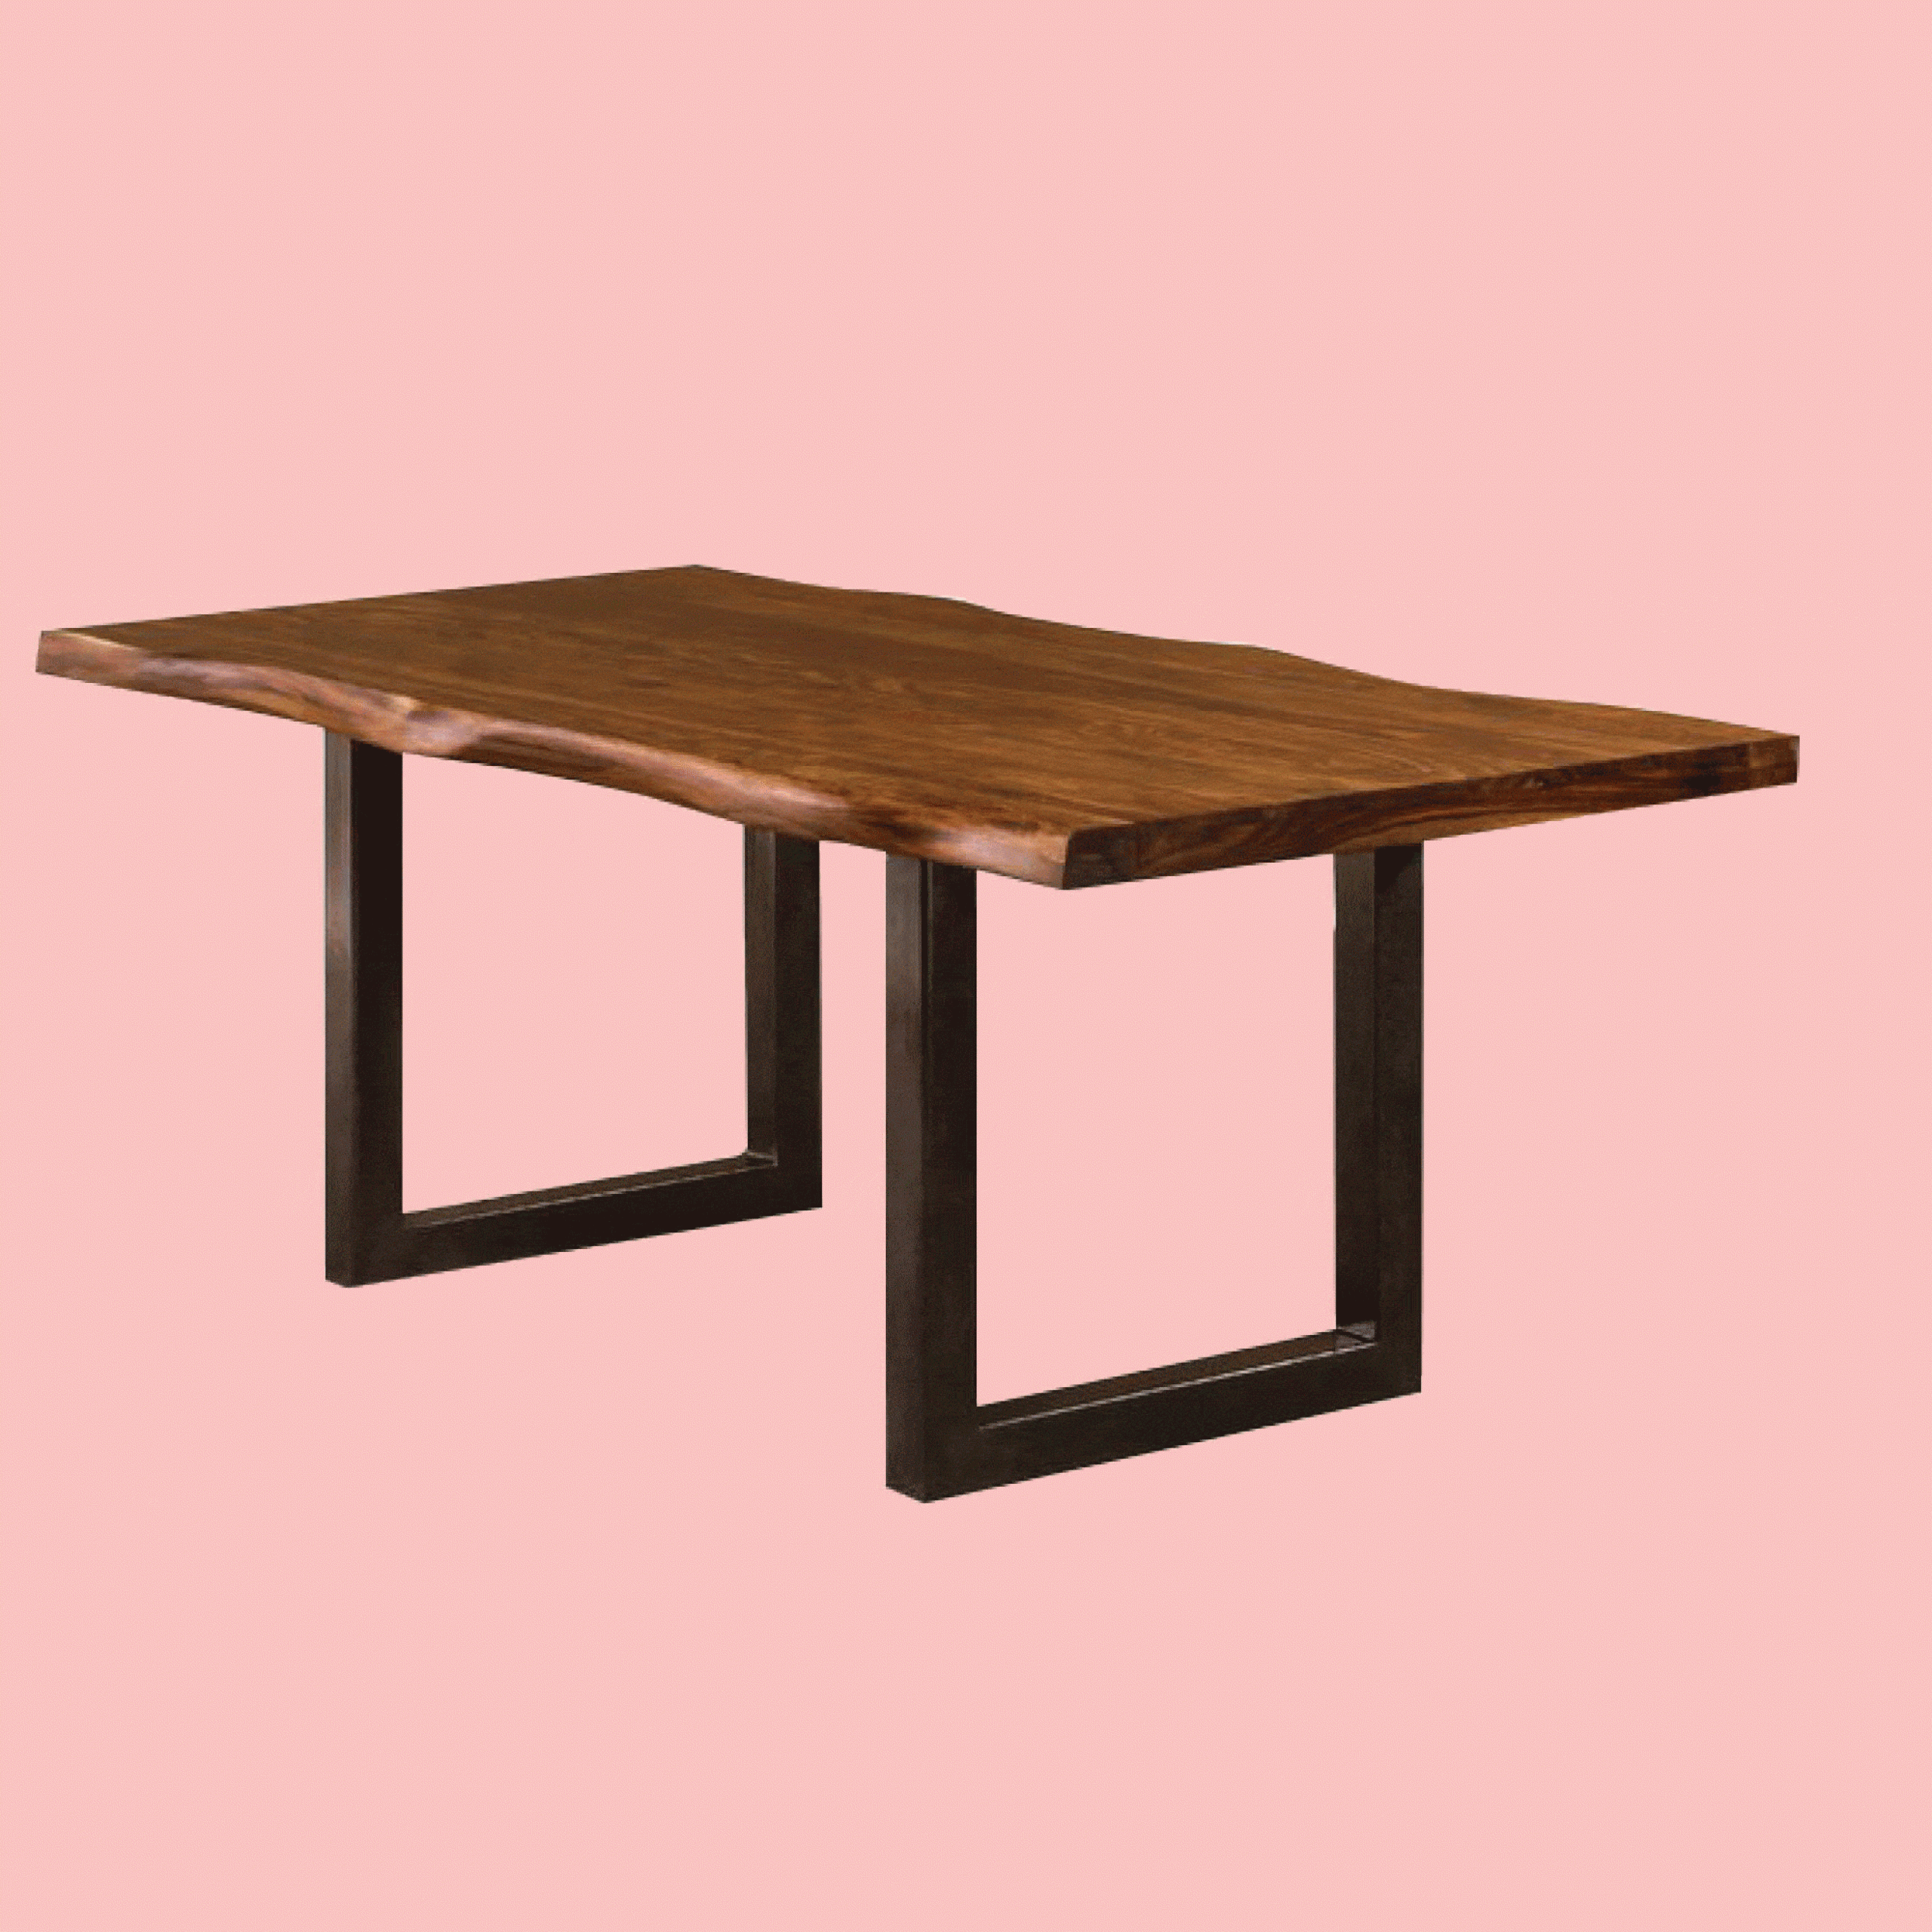 Preferred What Is A Live Edge Table? 10 Of Our Favorite Live Edge Tables With Acacia Wood Top Dining Tables With Iron Legs On Raw Metal (View 16 of 30)